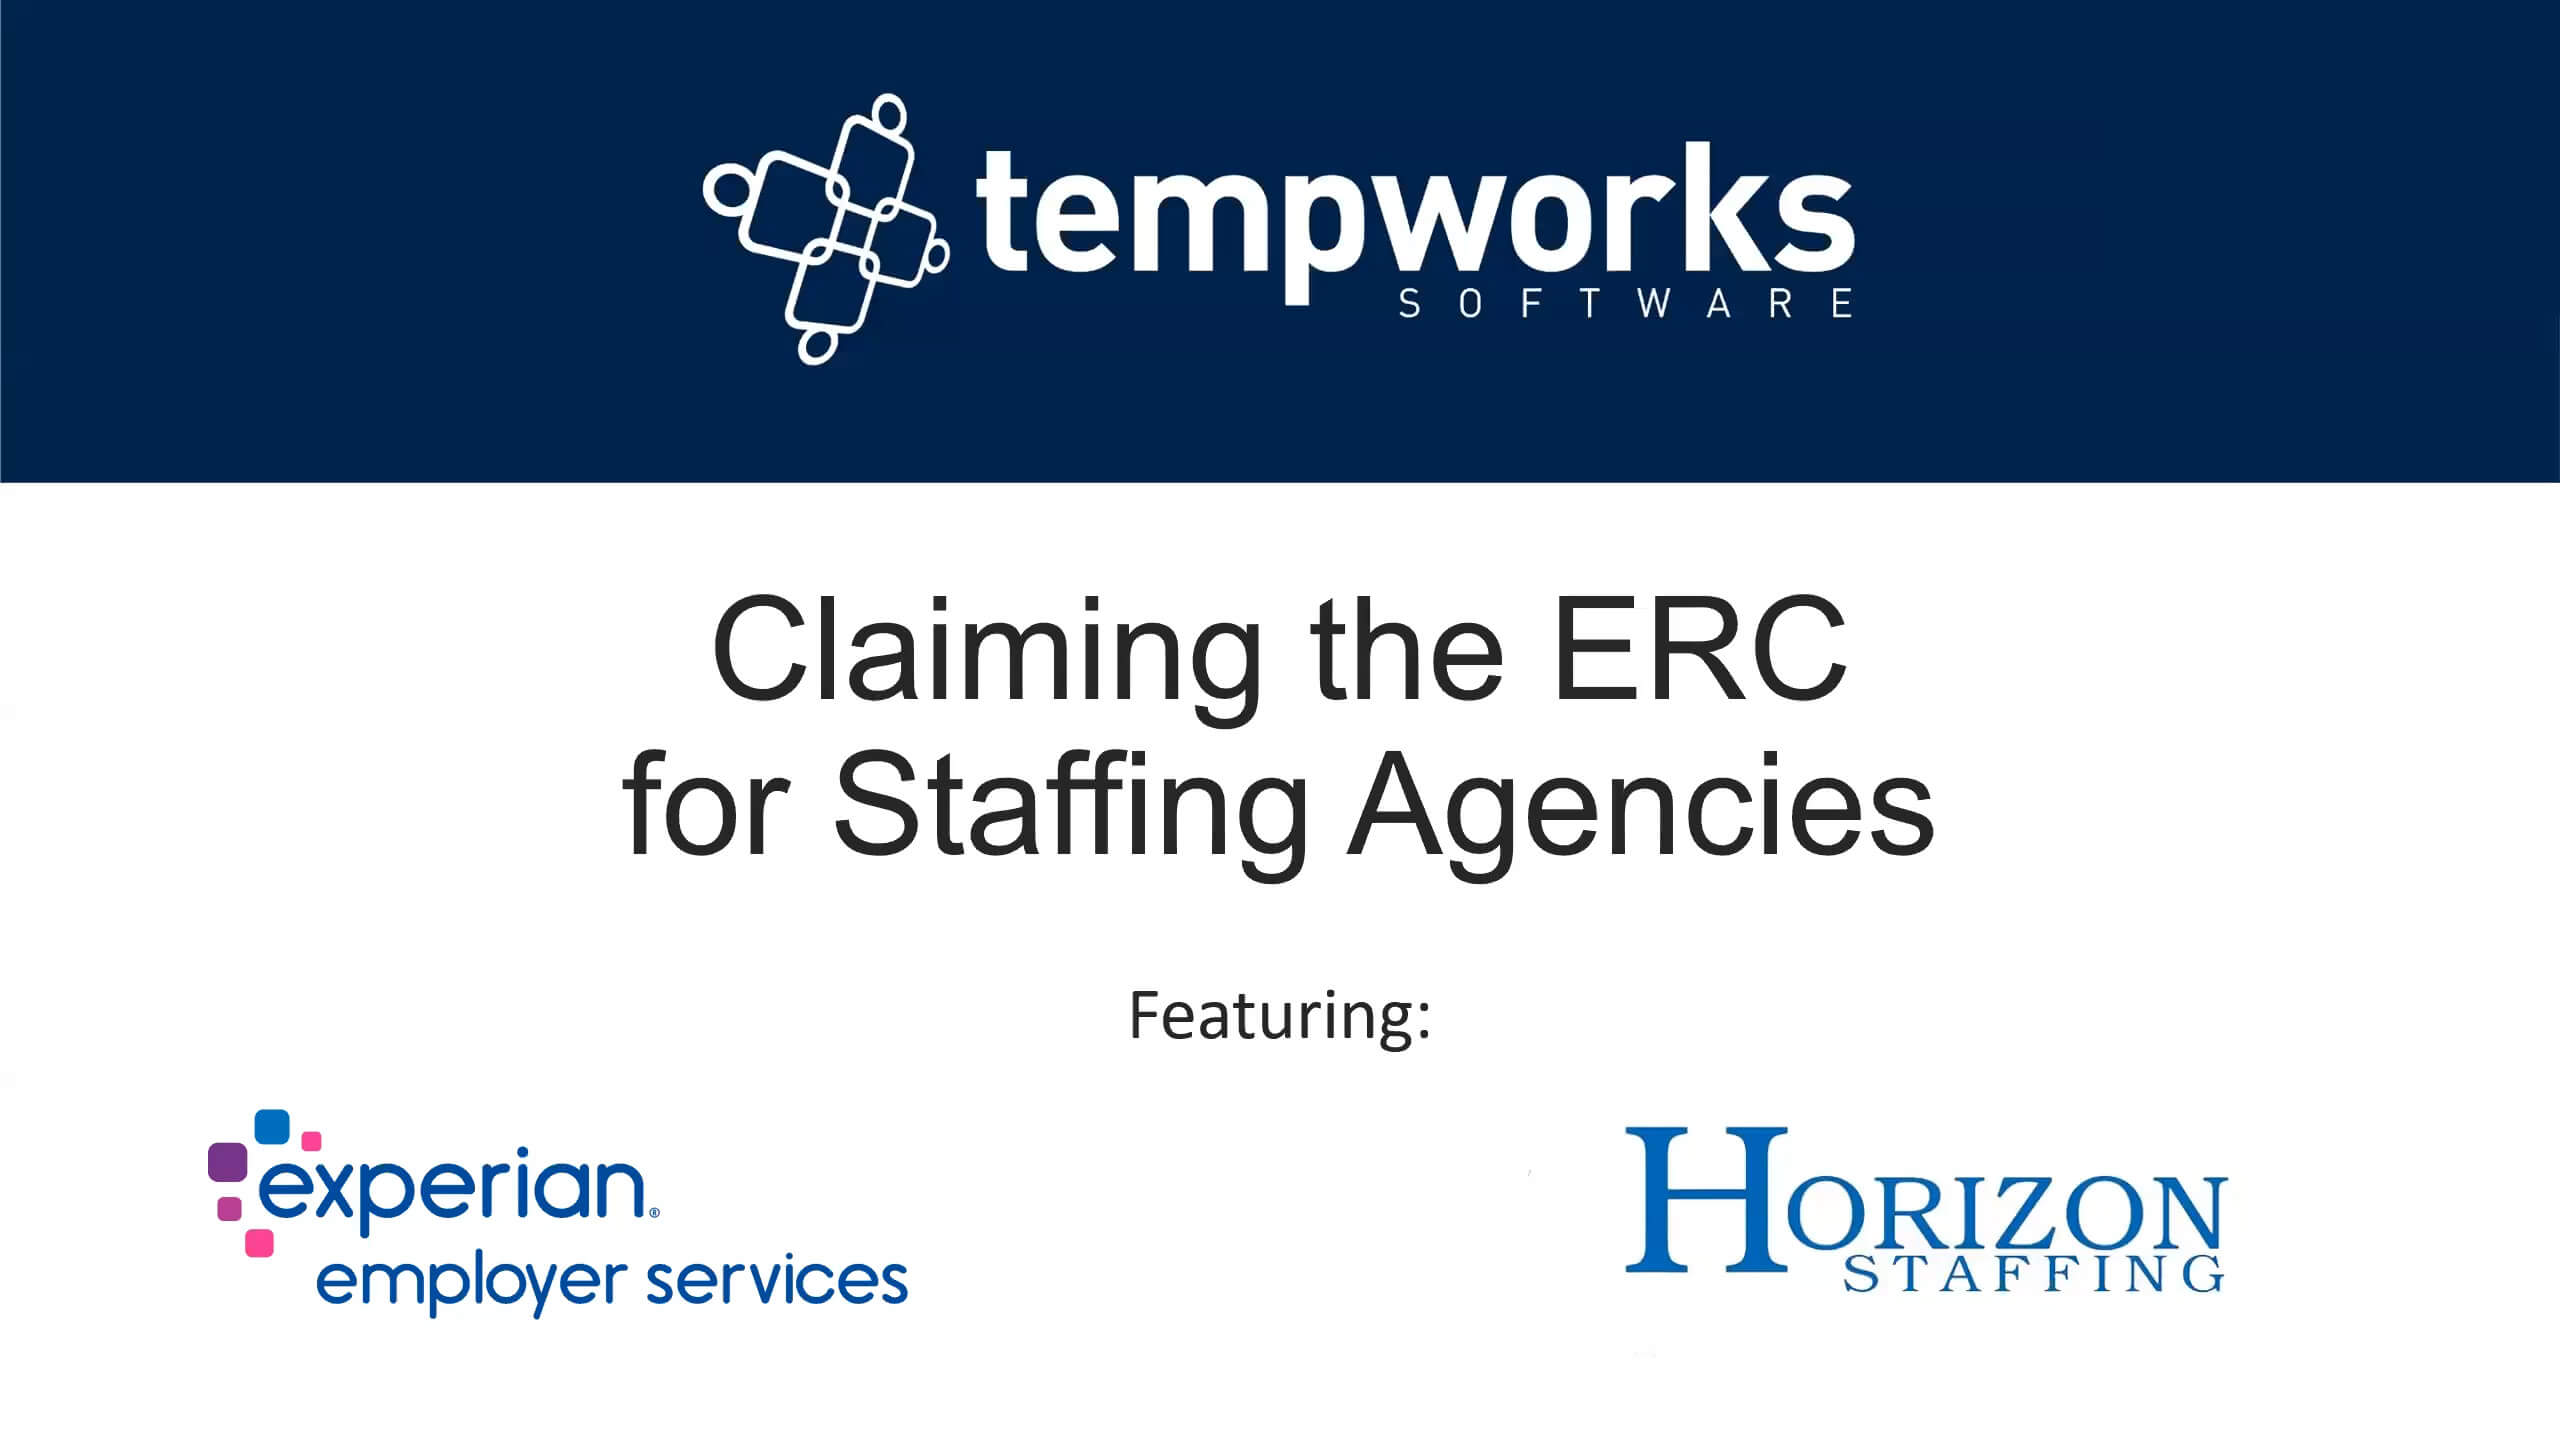 Claiming the ERC for Staffing Agencies